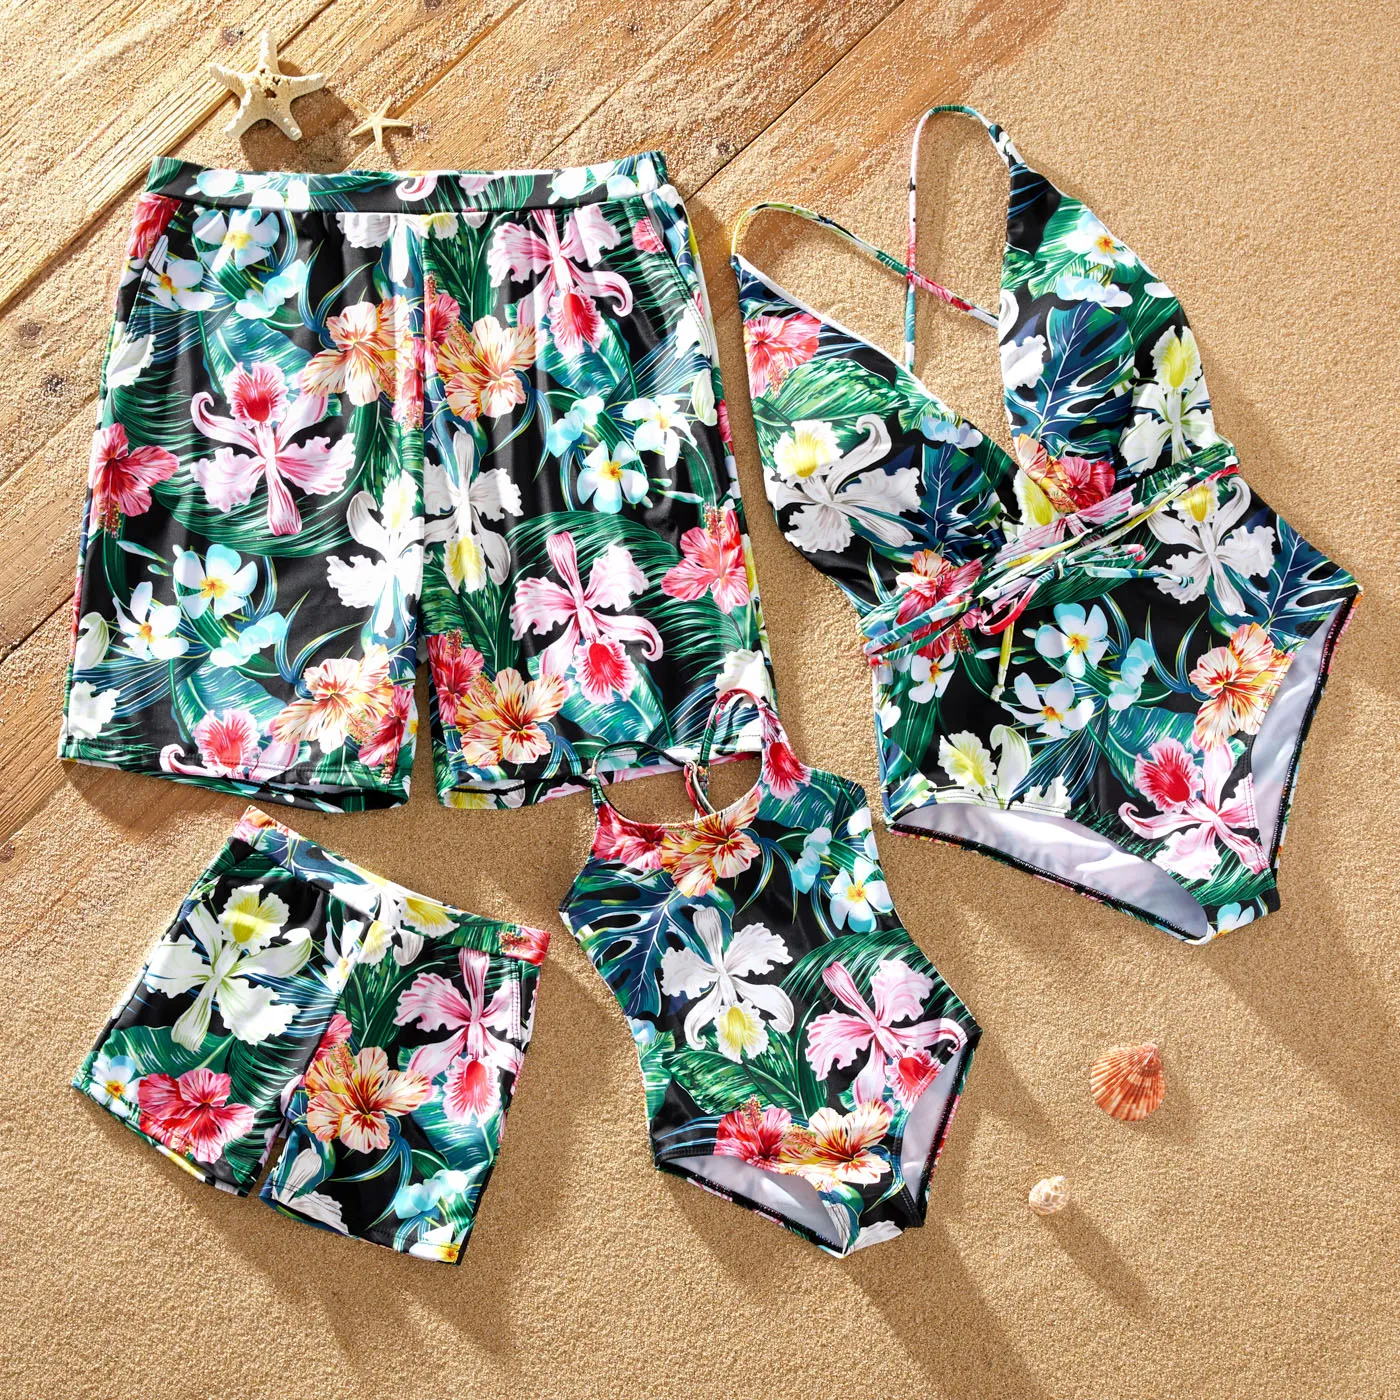 Family Matching Allover Floral Print Swim Trunks Shorts and Spaghetti Strap One-Piece Swimsuit